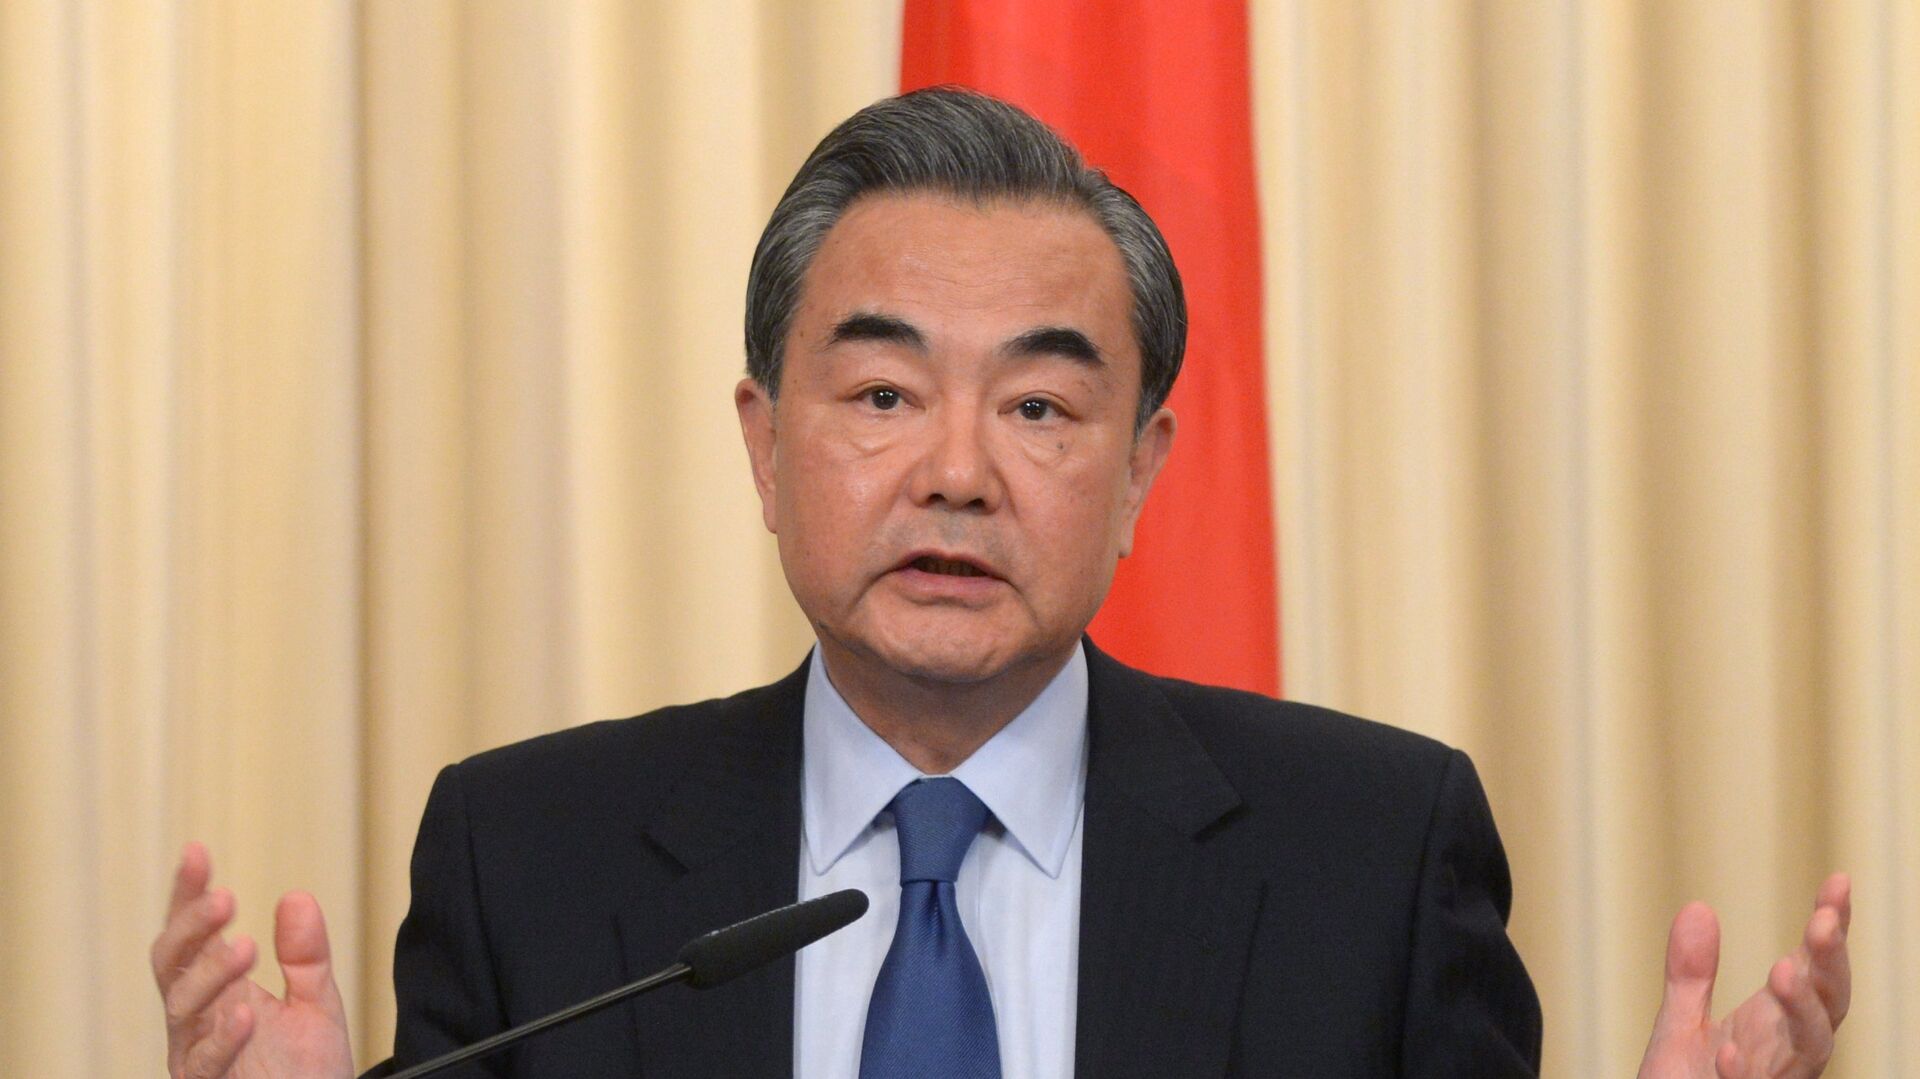 Foreign Minister of the People's Republic of China Wang Yi during a joint press conference with Russian Foreign Minister Sergey Lavrov on the results of their meeting in Moscow - Sputnik International, 1920, 22.05.2022